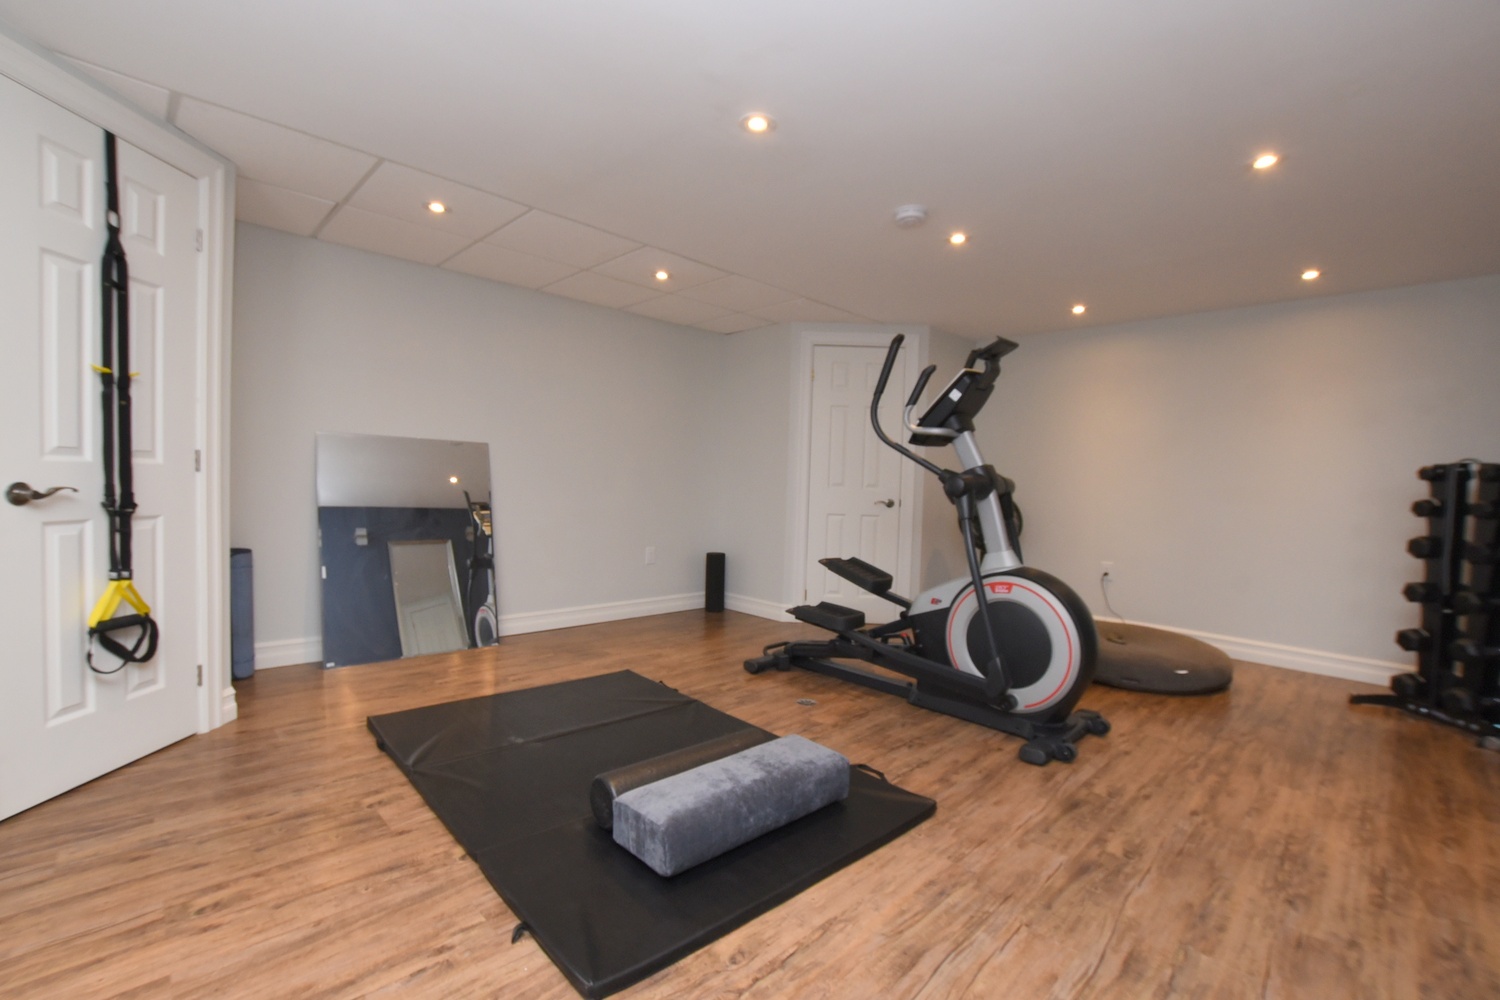 B - Exercise Room